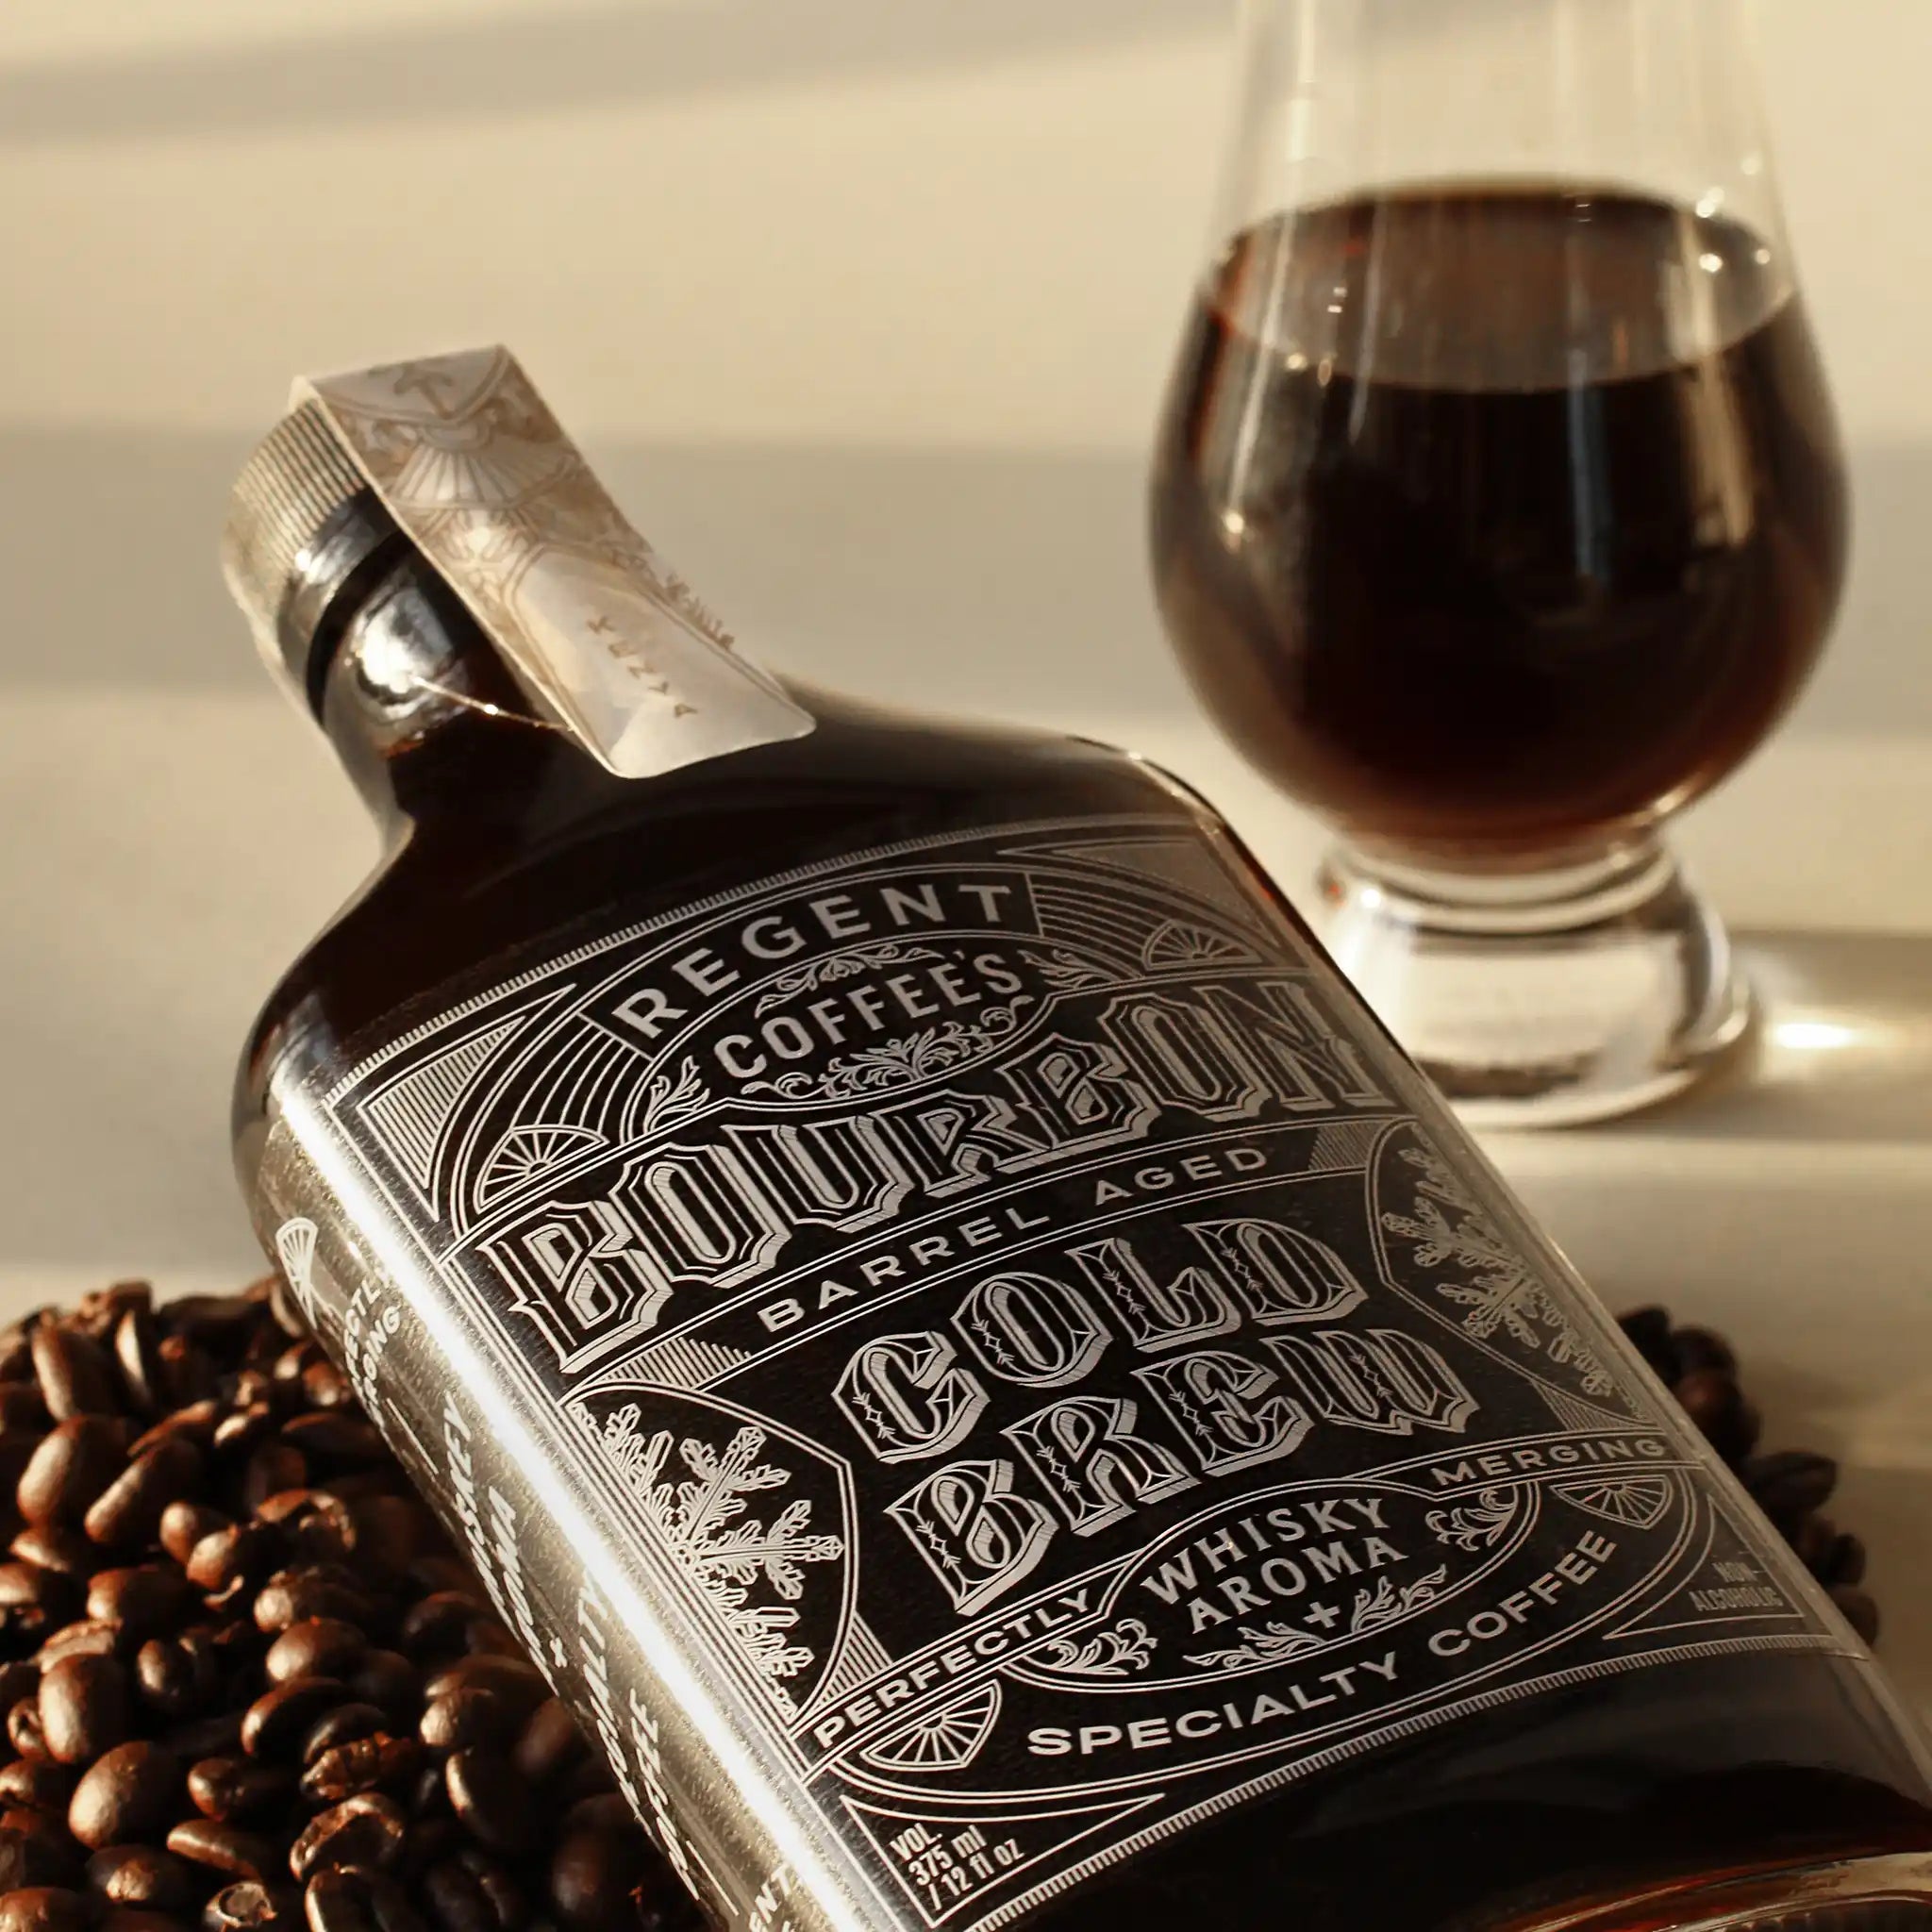 Regent Coffee's glass bottle ice cold brew coffee, atop a bed of dark roasted coffee beans